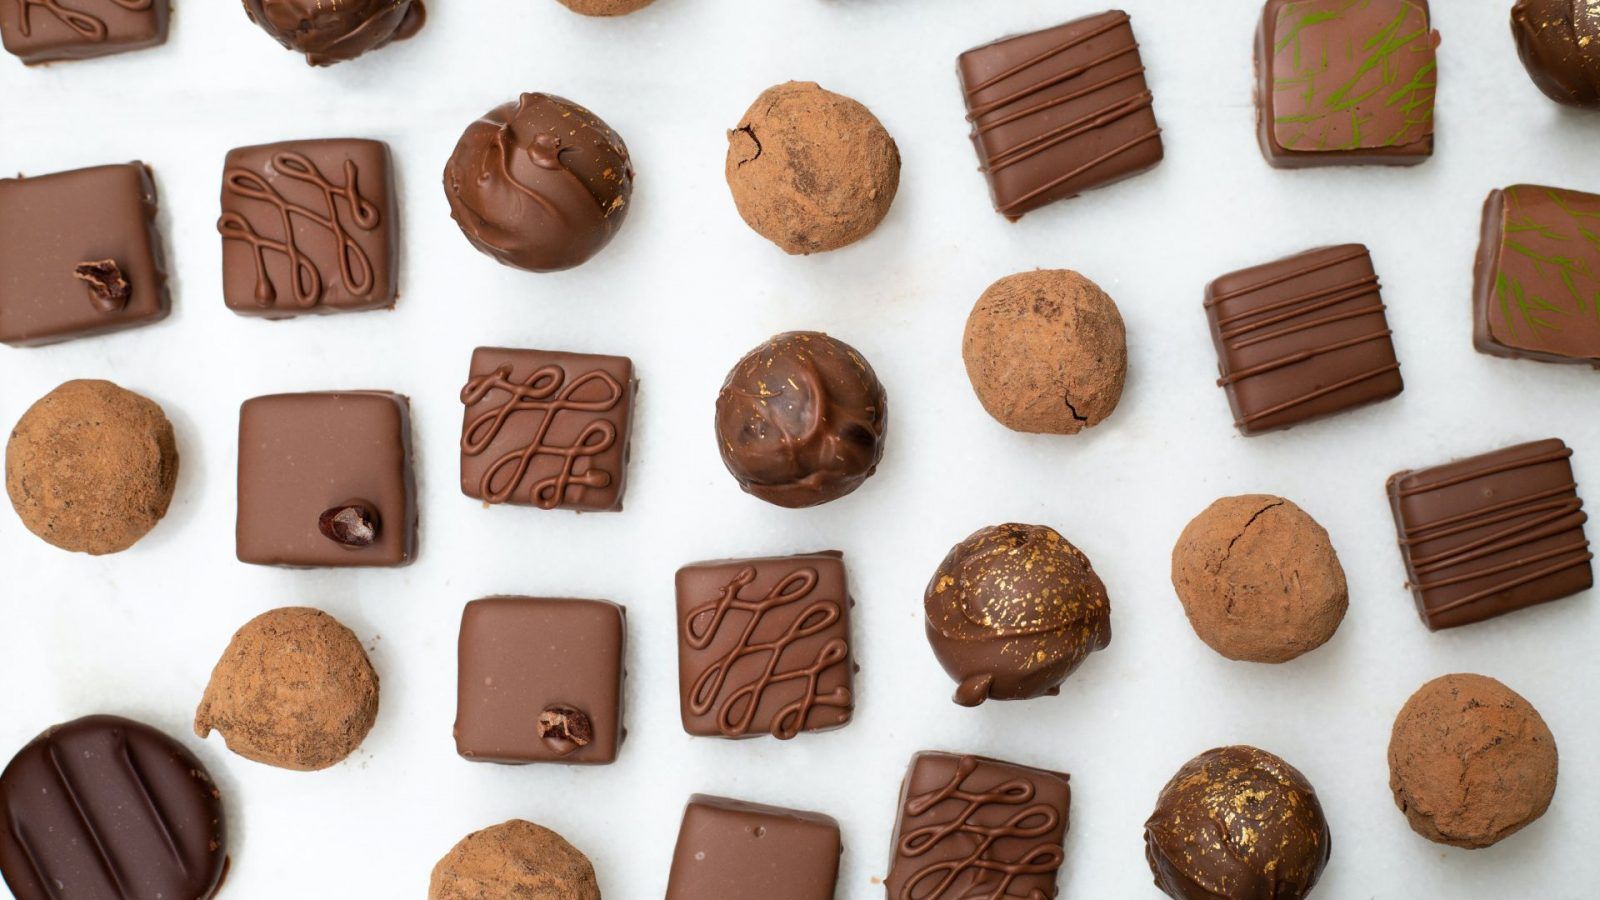 15 Ethical And Sustainable Chocolate Brands For Guilt-free Snacking